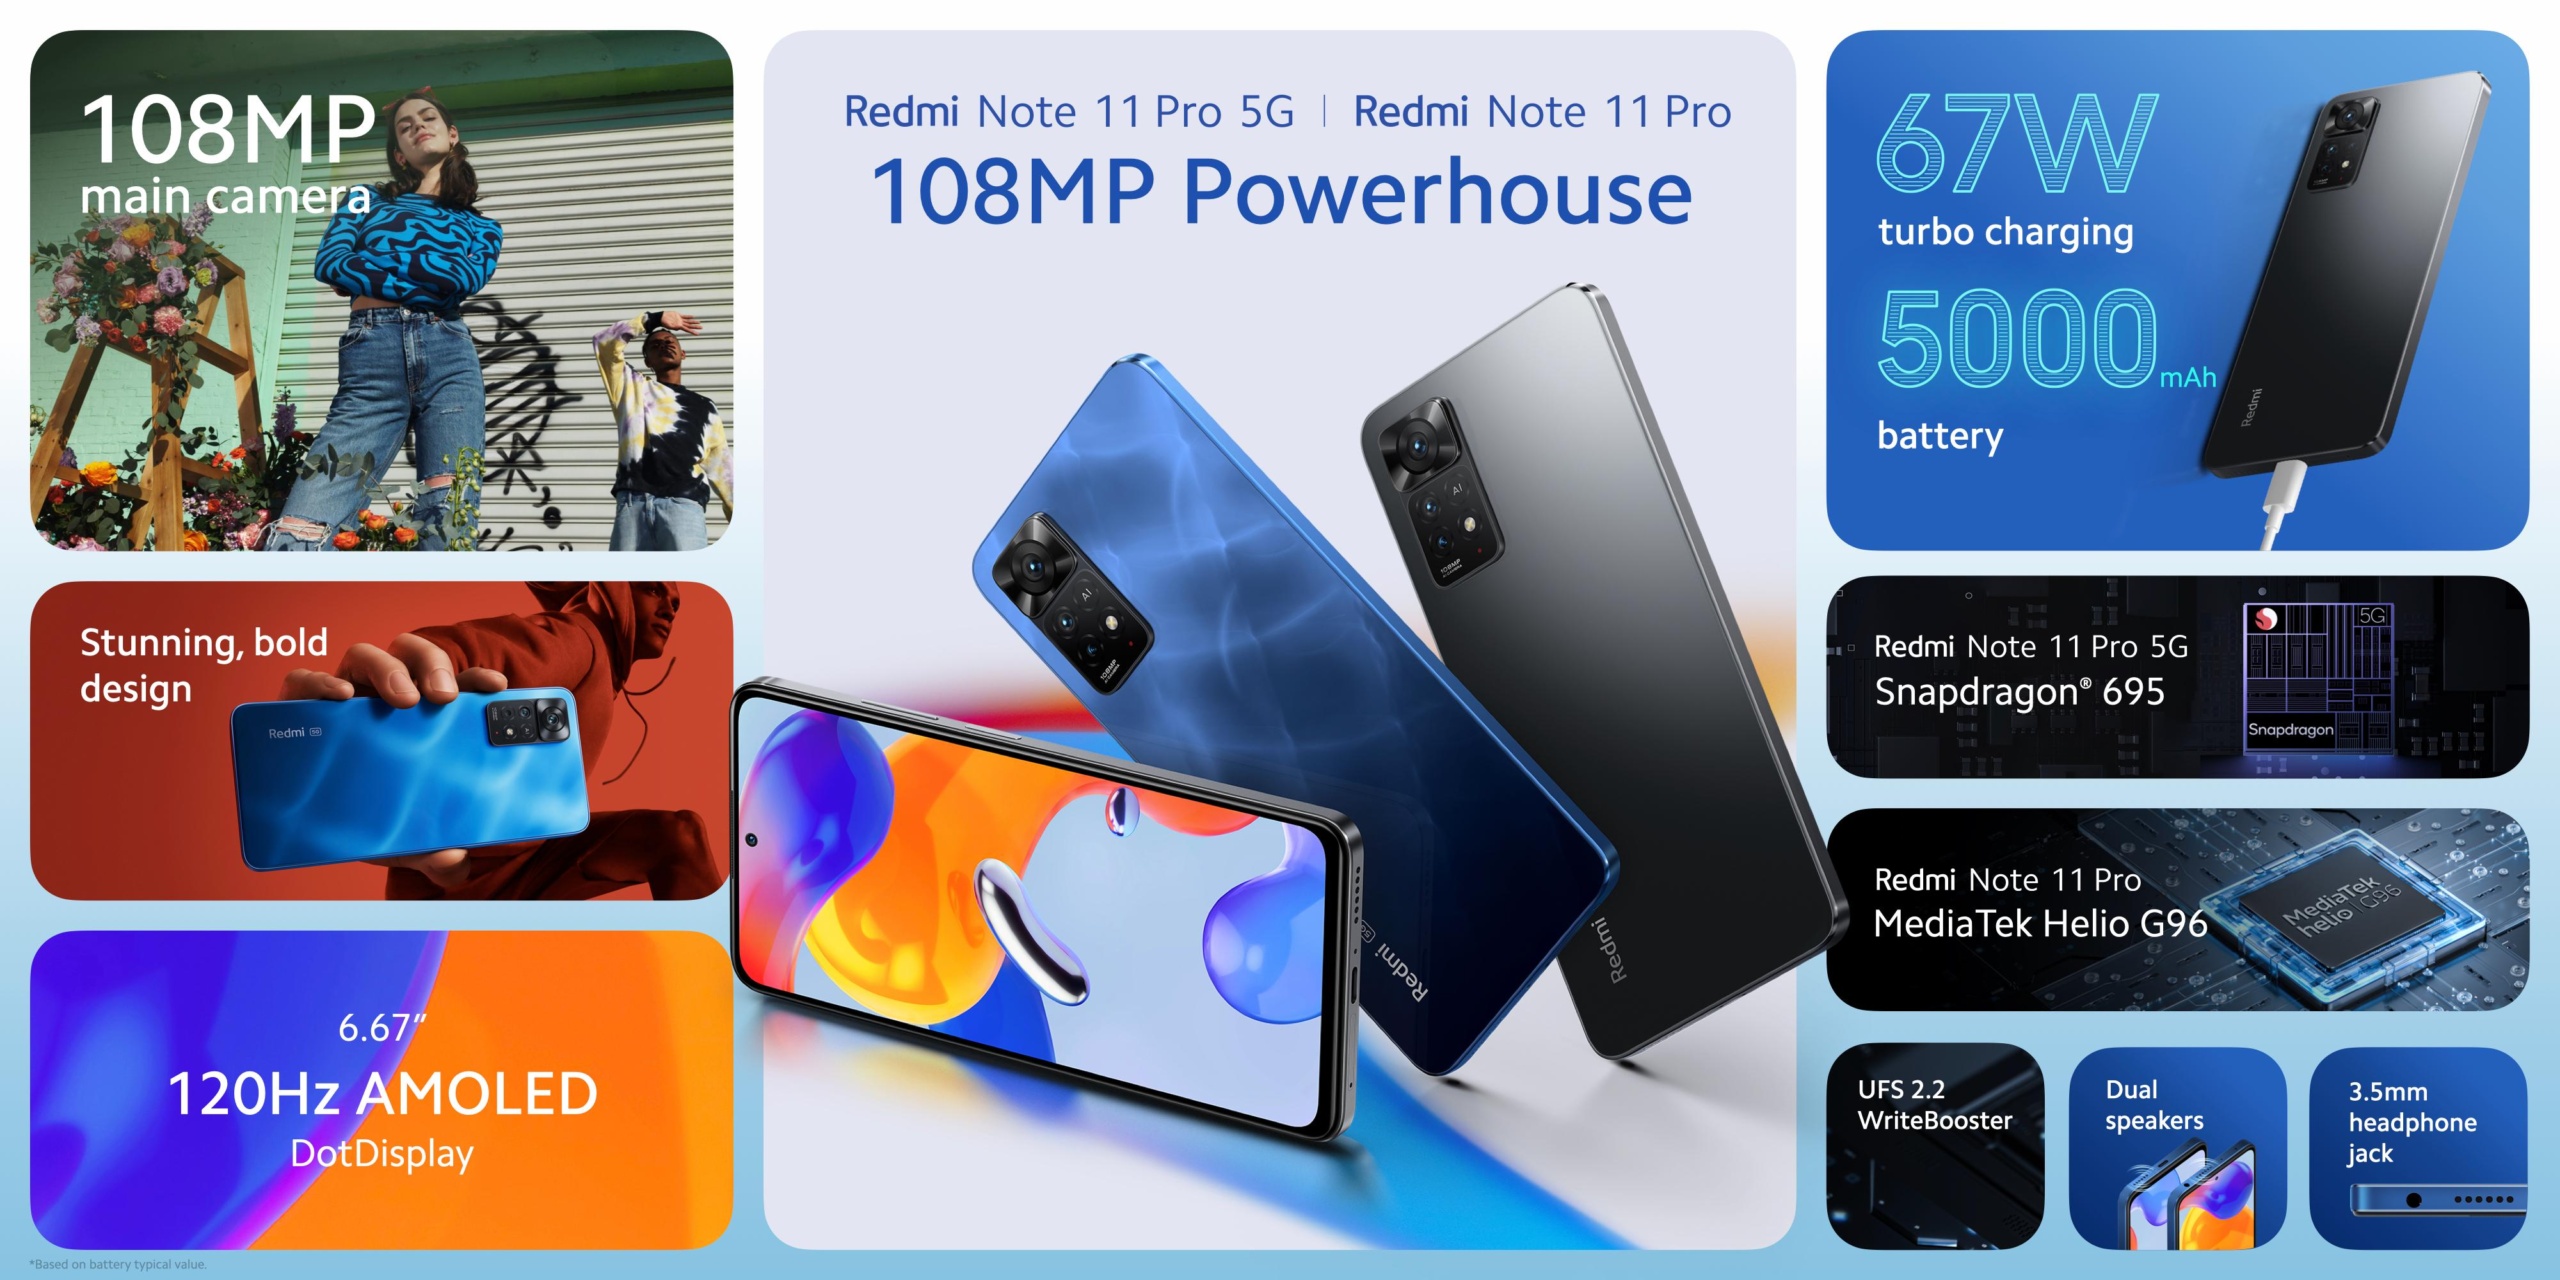 Xiaomi introduced new models Redmi Note 11 and Note 11S ⋆ 9